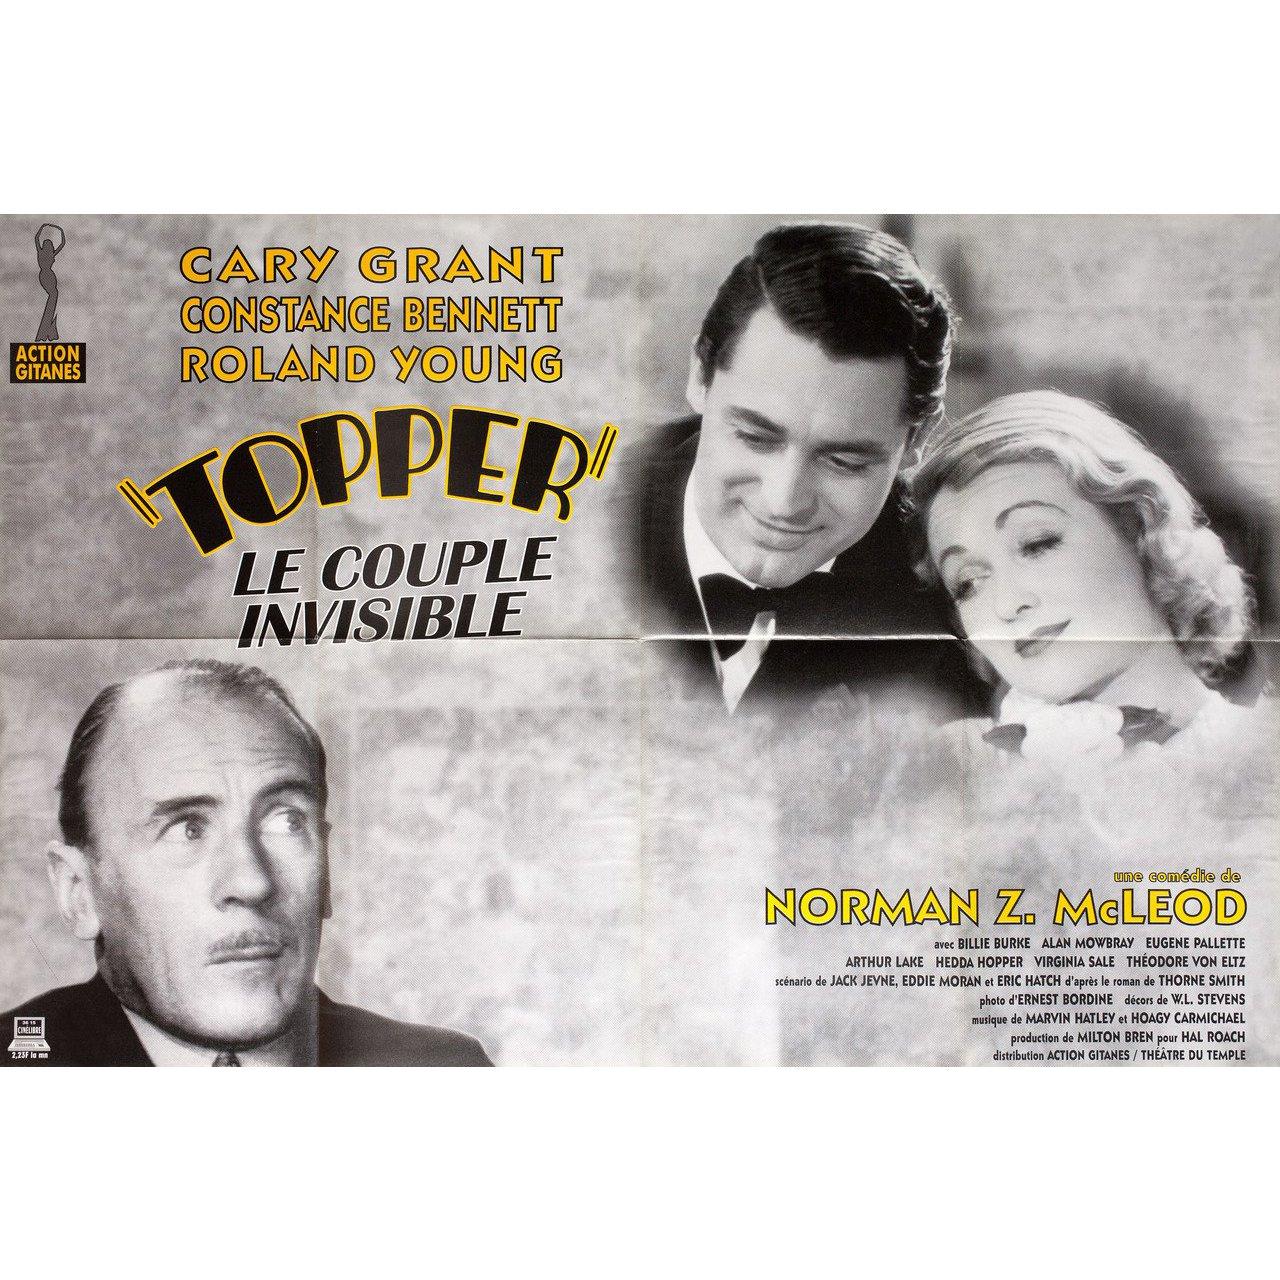 Original 1990s re-release French half grande poster for the 1937 film Topper directed by Norman Z. McLeod with Constance Bennett / Cary Grant / Roland Young / Billie Burke. Fine condition, folded. Many original posters were issued folded or were